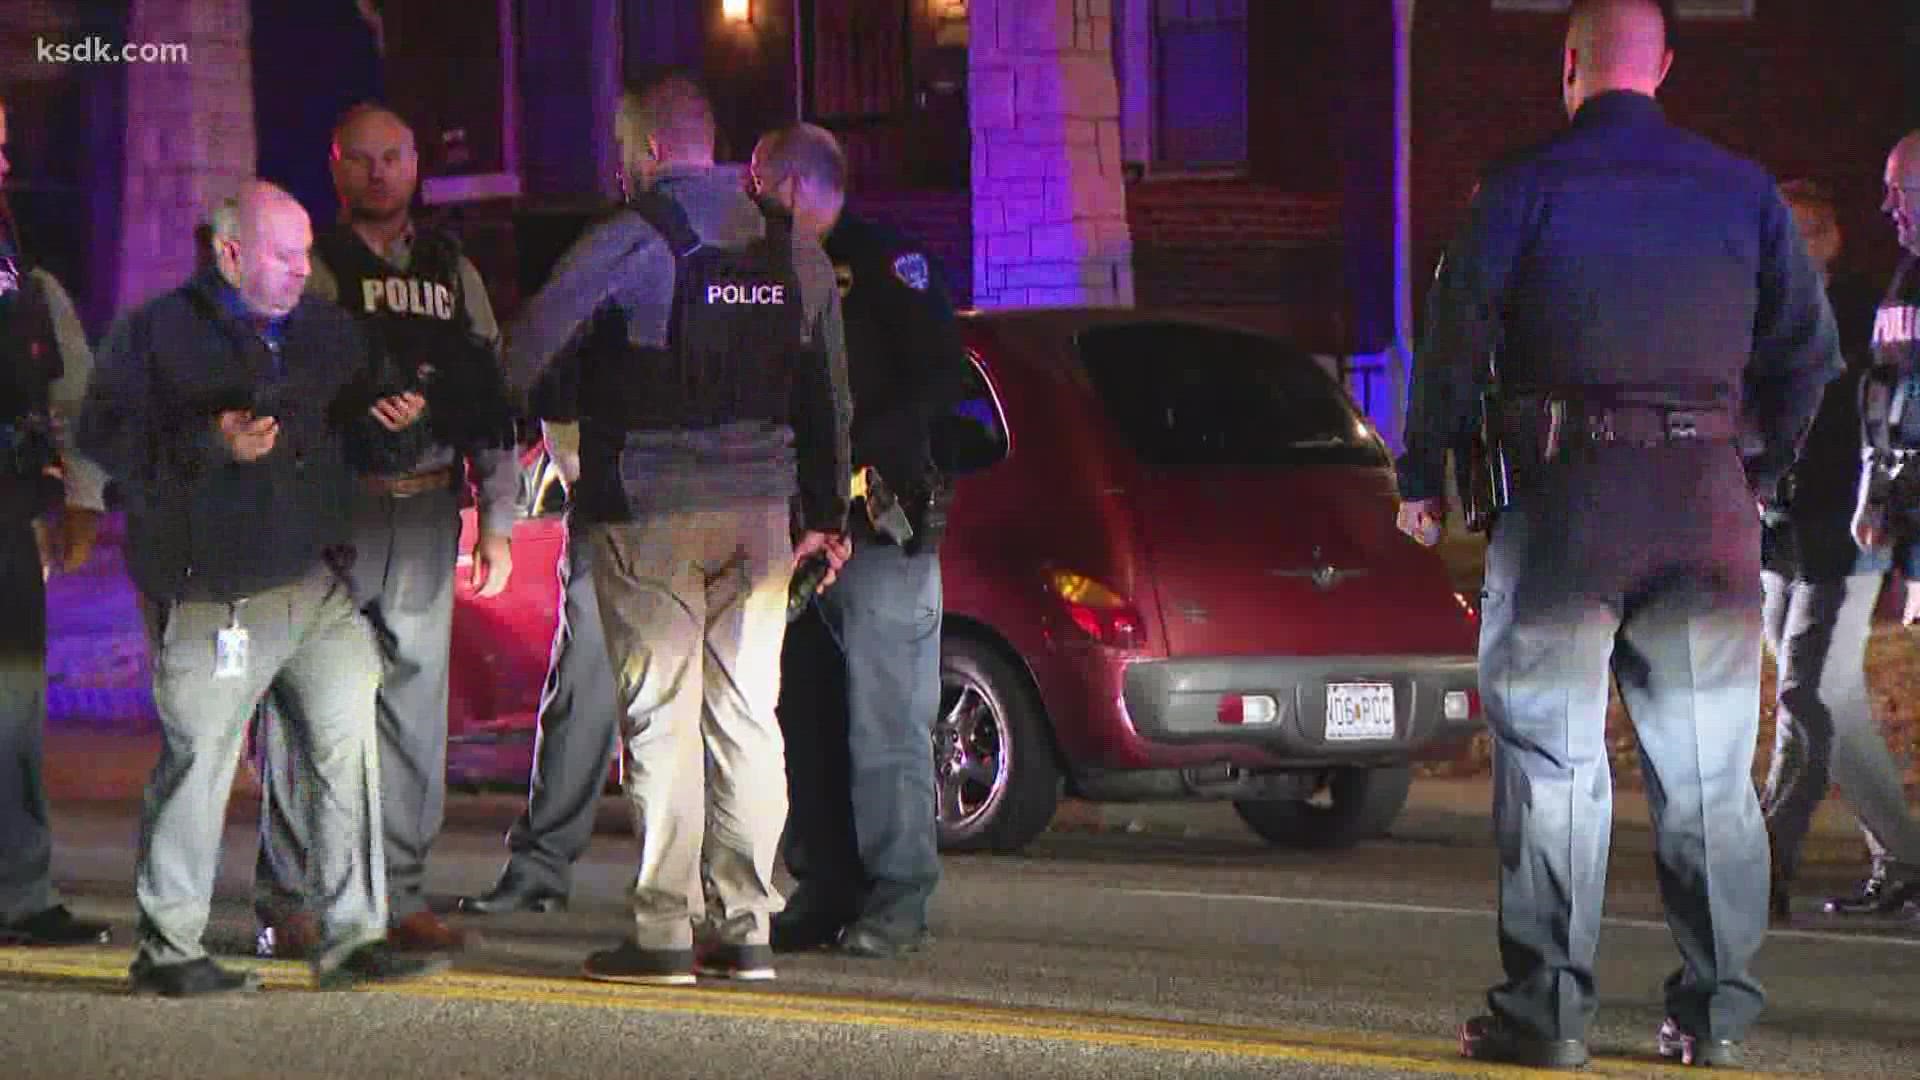 Police surrounded the car on Lucas and Hunt Road near I-70 Monday night. They would not confirm if it was related to the MetroBus shooting investigation.